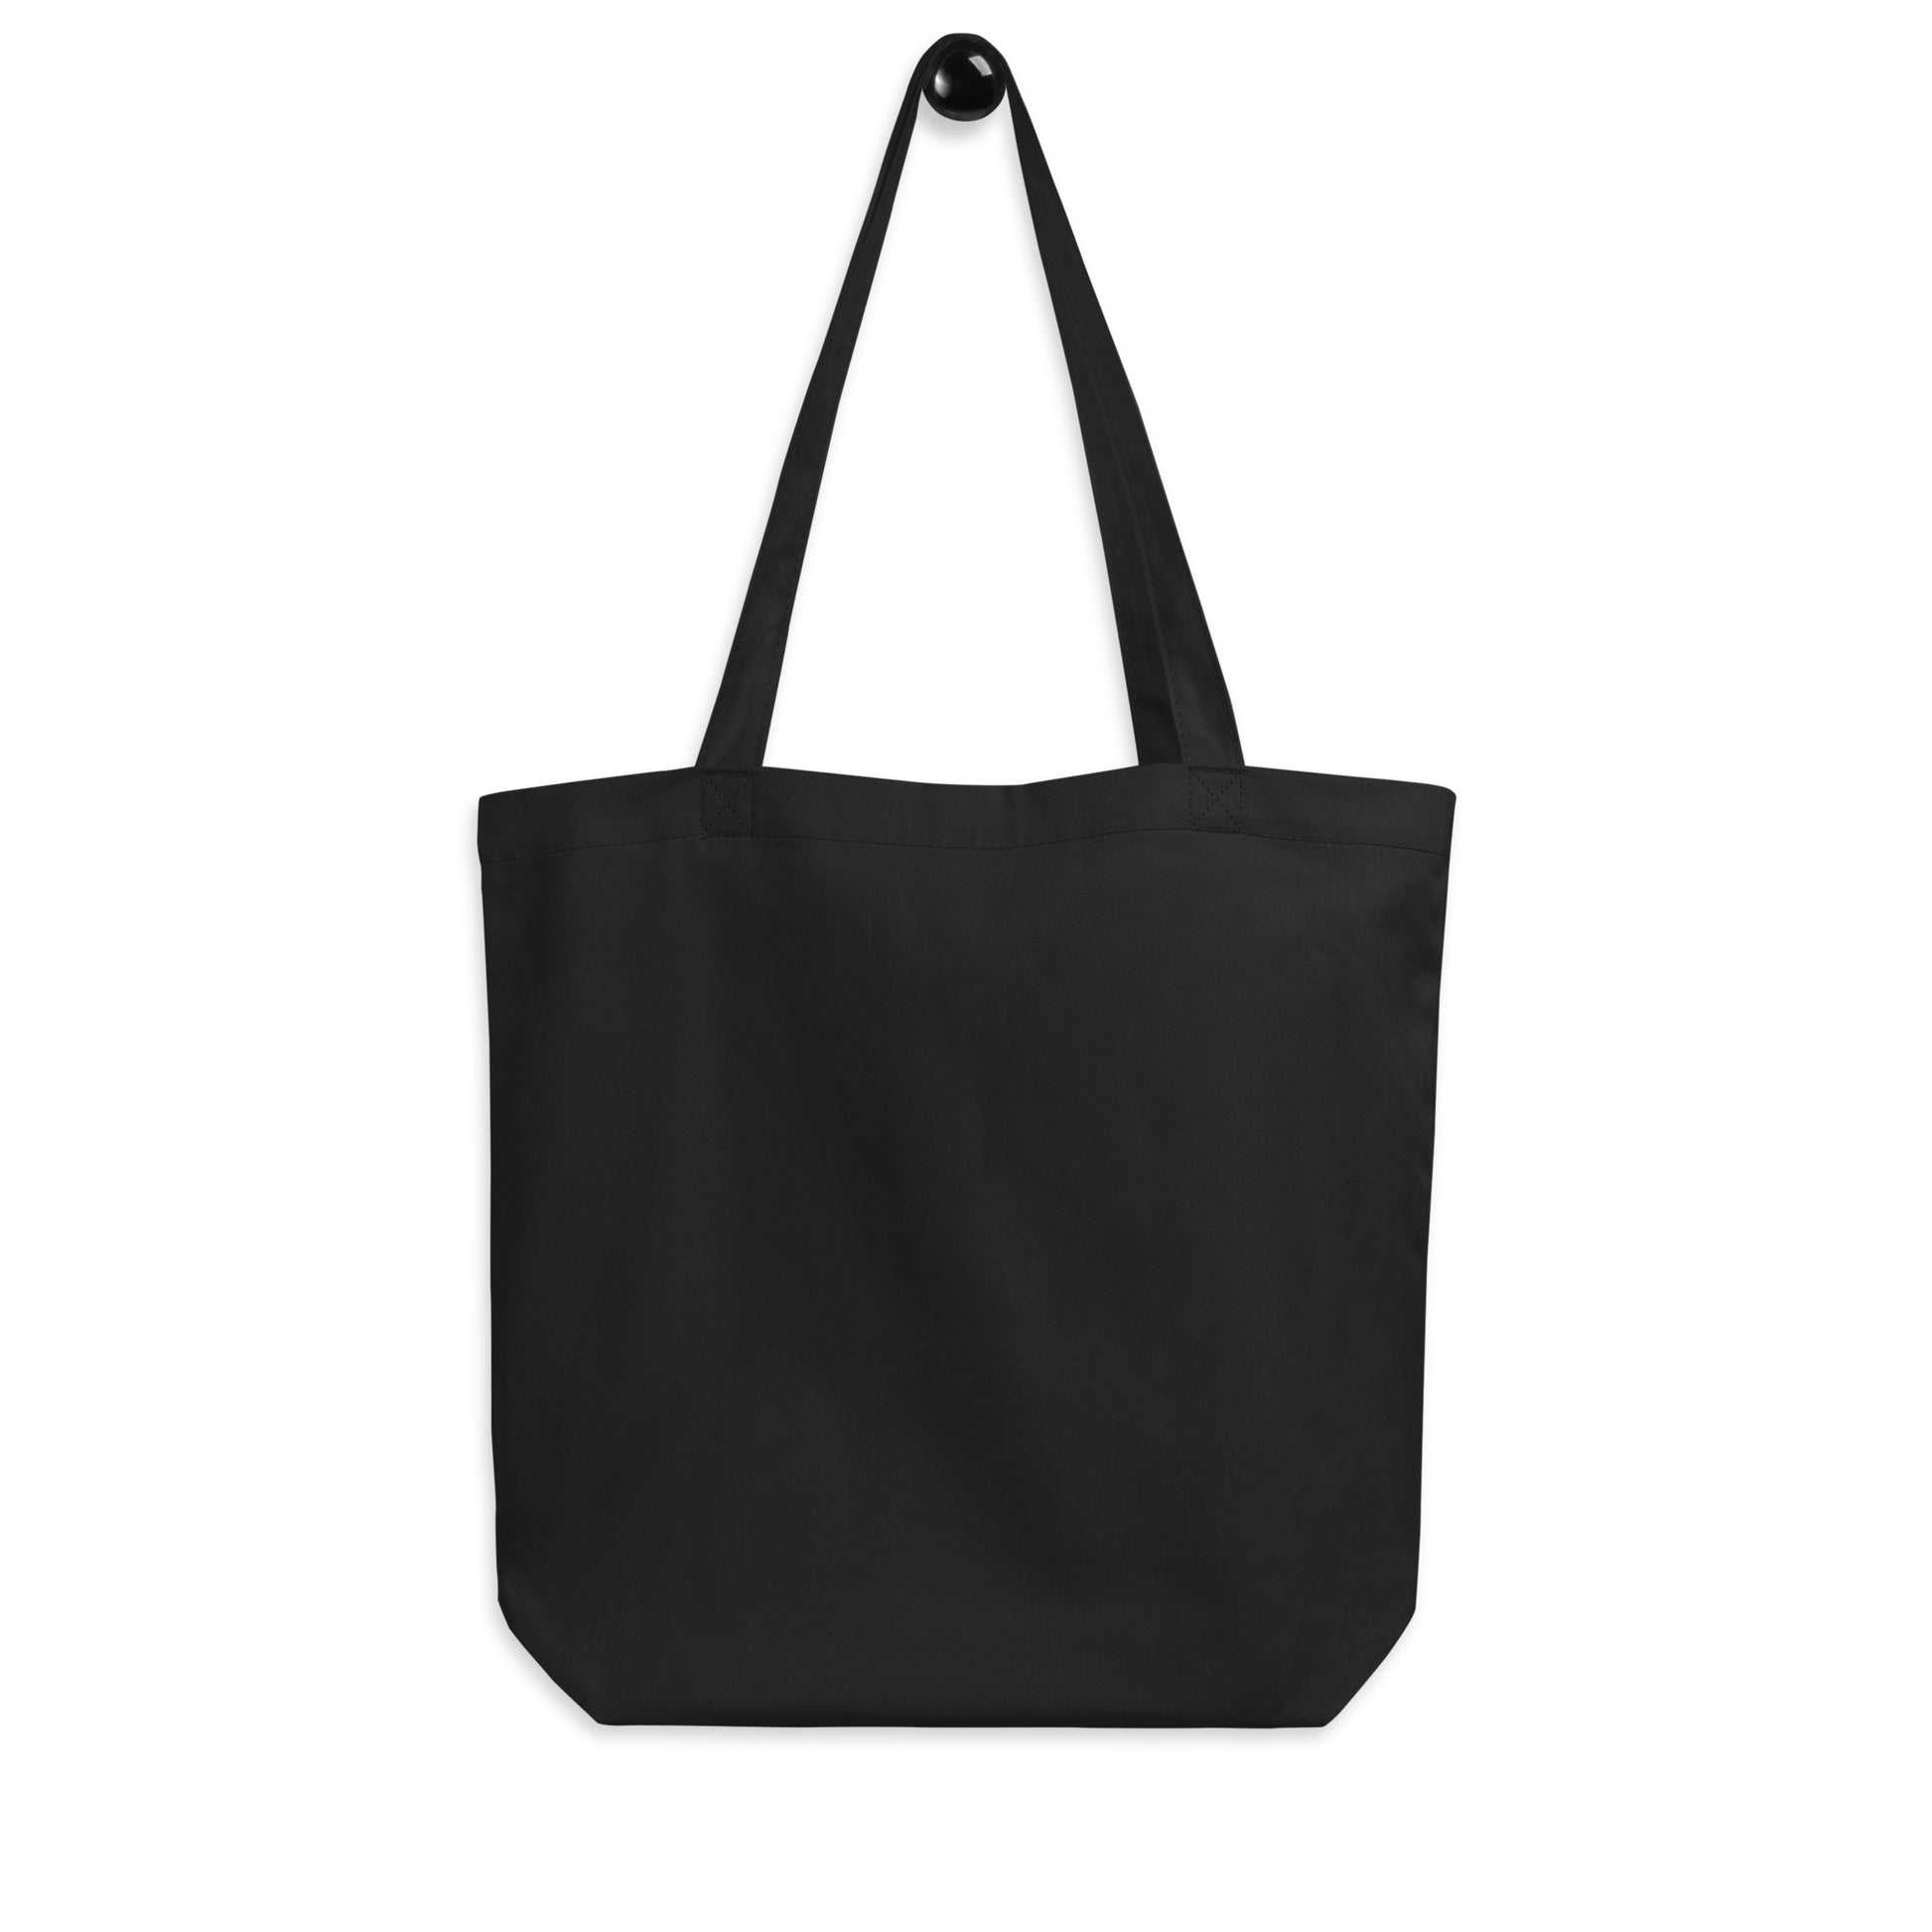 Unique Travel Gift Organic Tote - White Oval • MKE Milwaukee • YHM Designs - Image 05